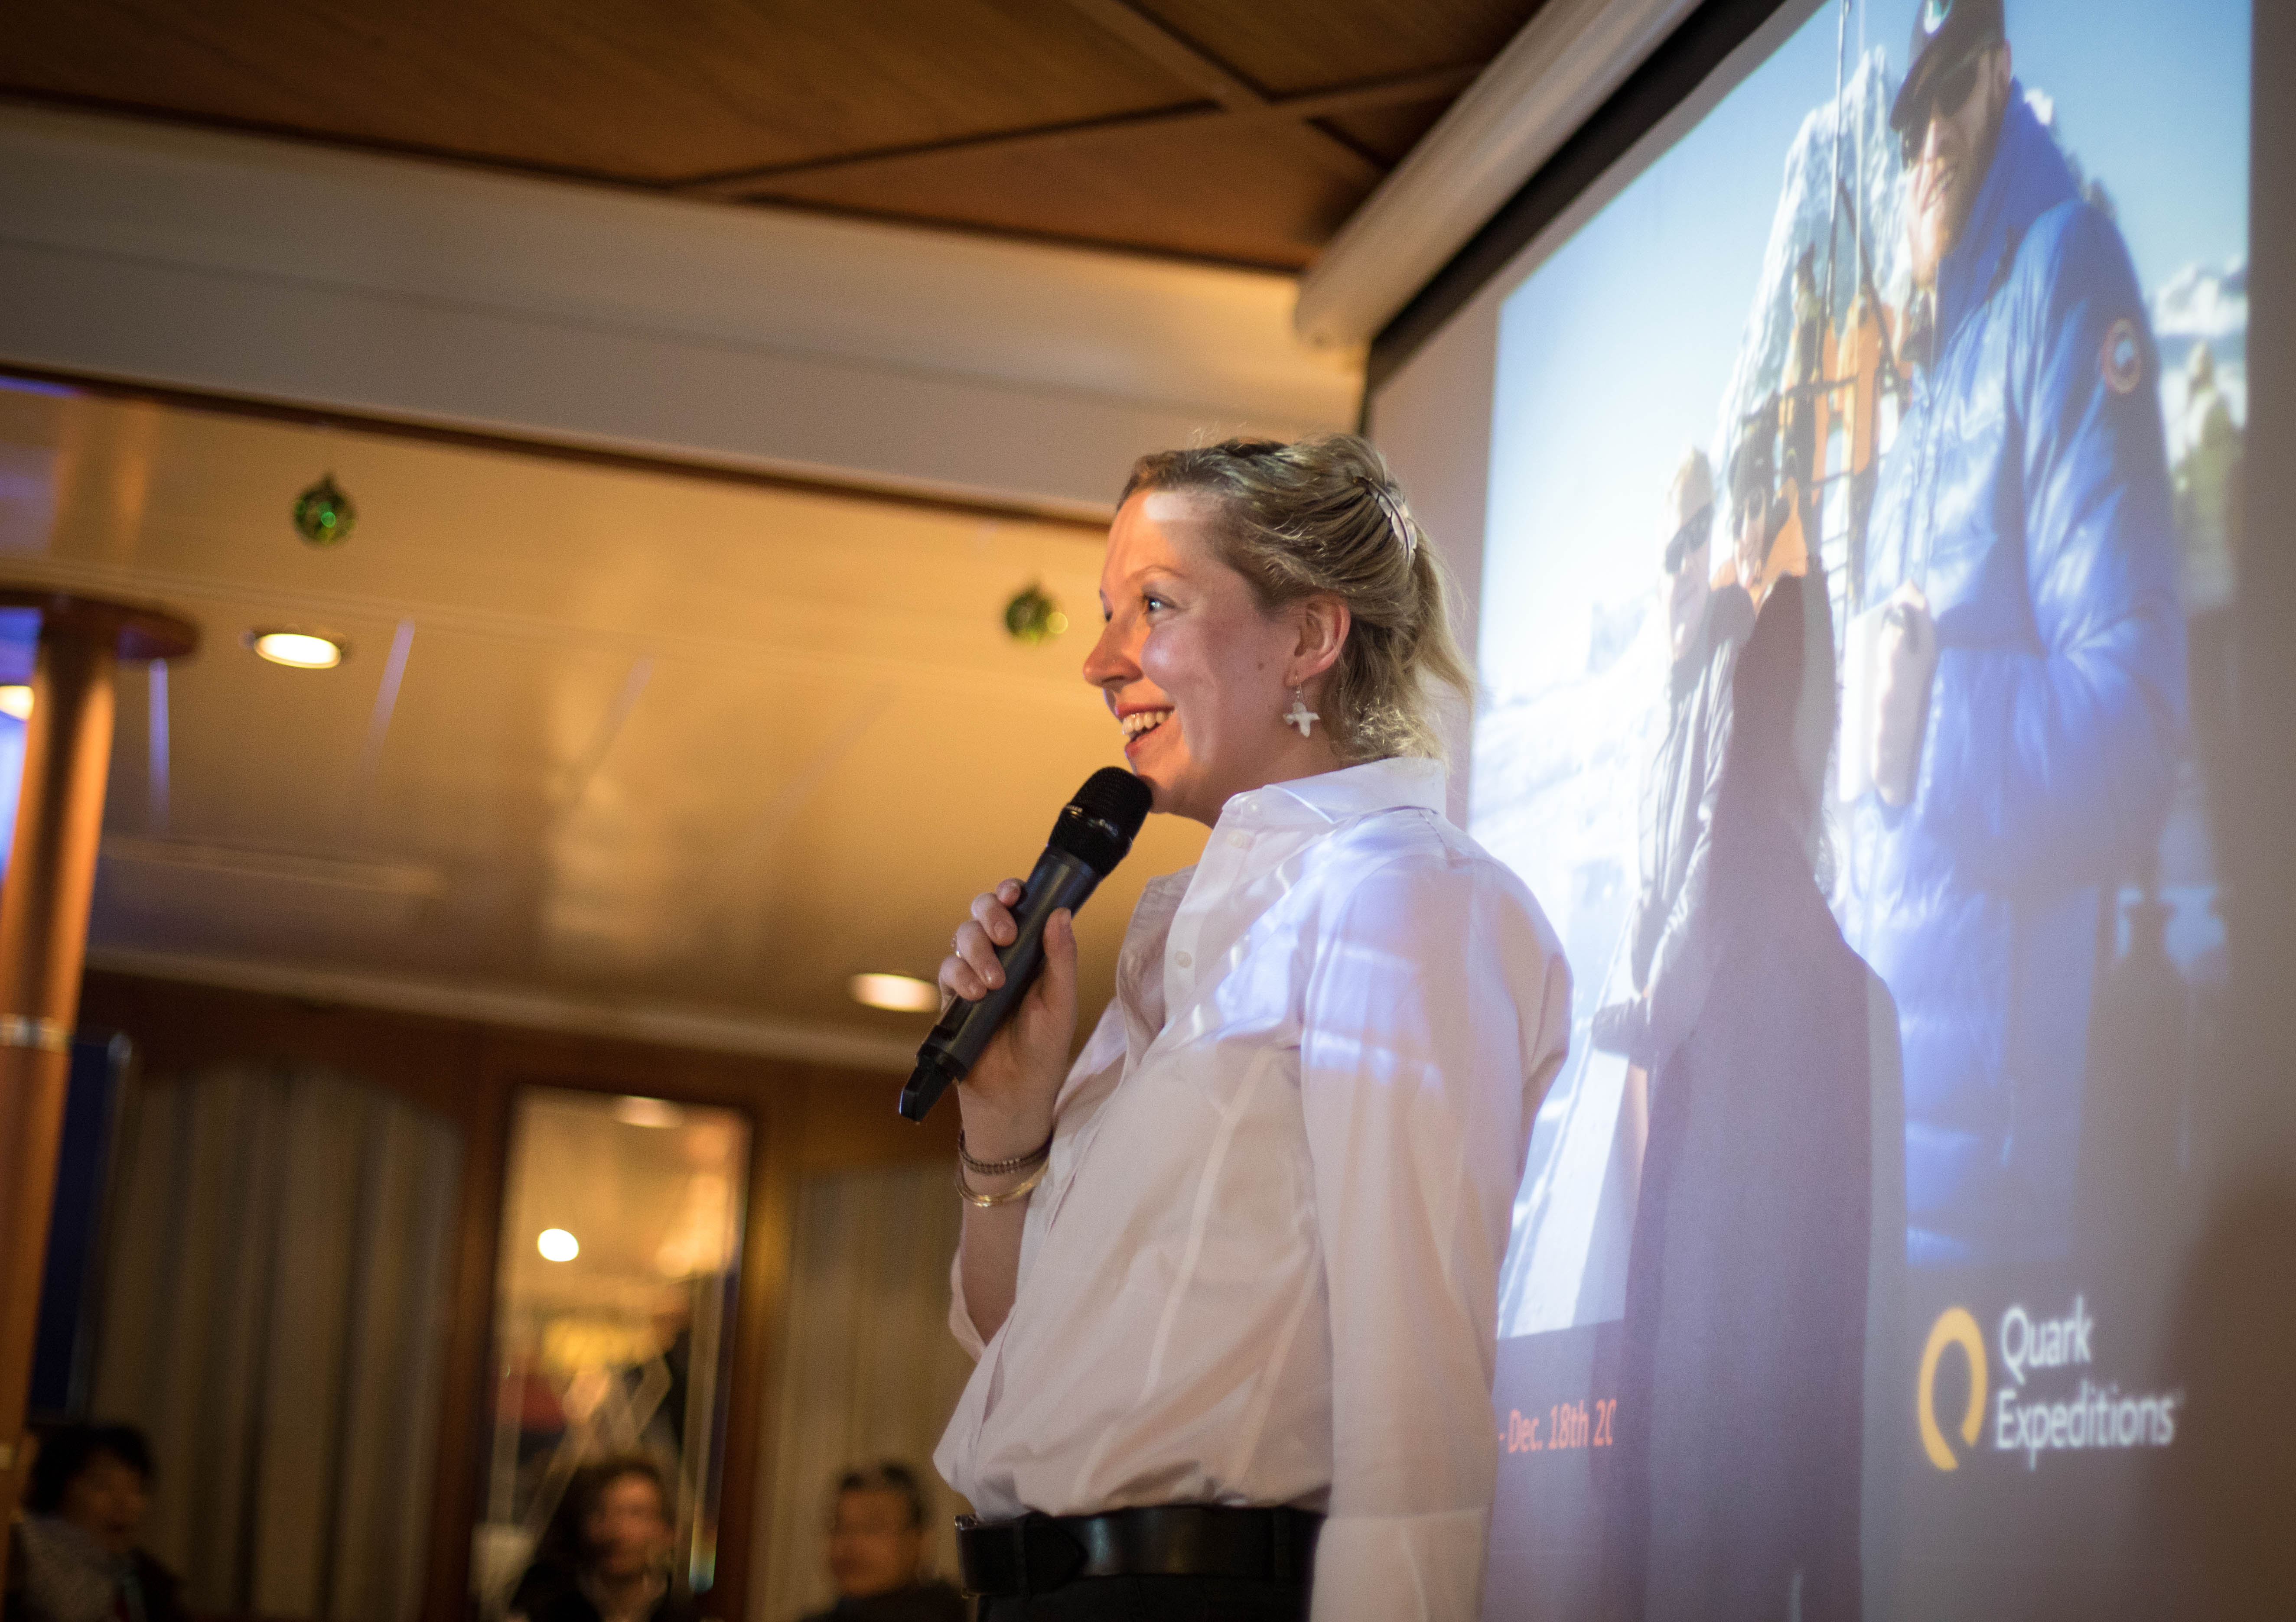 Expedition Team member Franny Bergschneider giving a lecture onboard the Ocean Diamond. Photo: Acacia Johnson